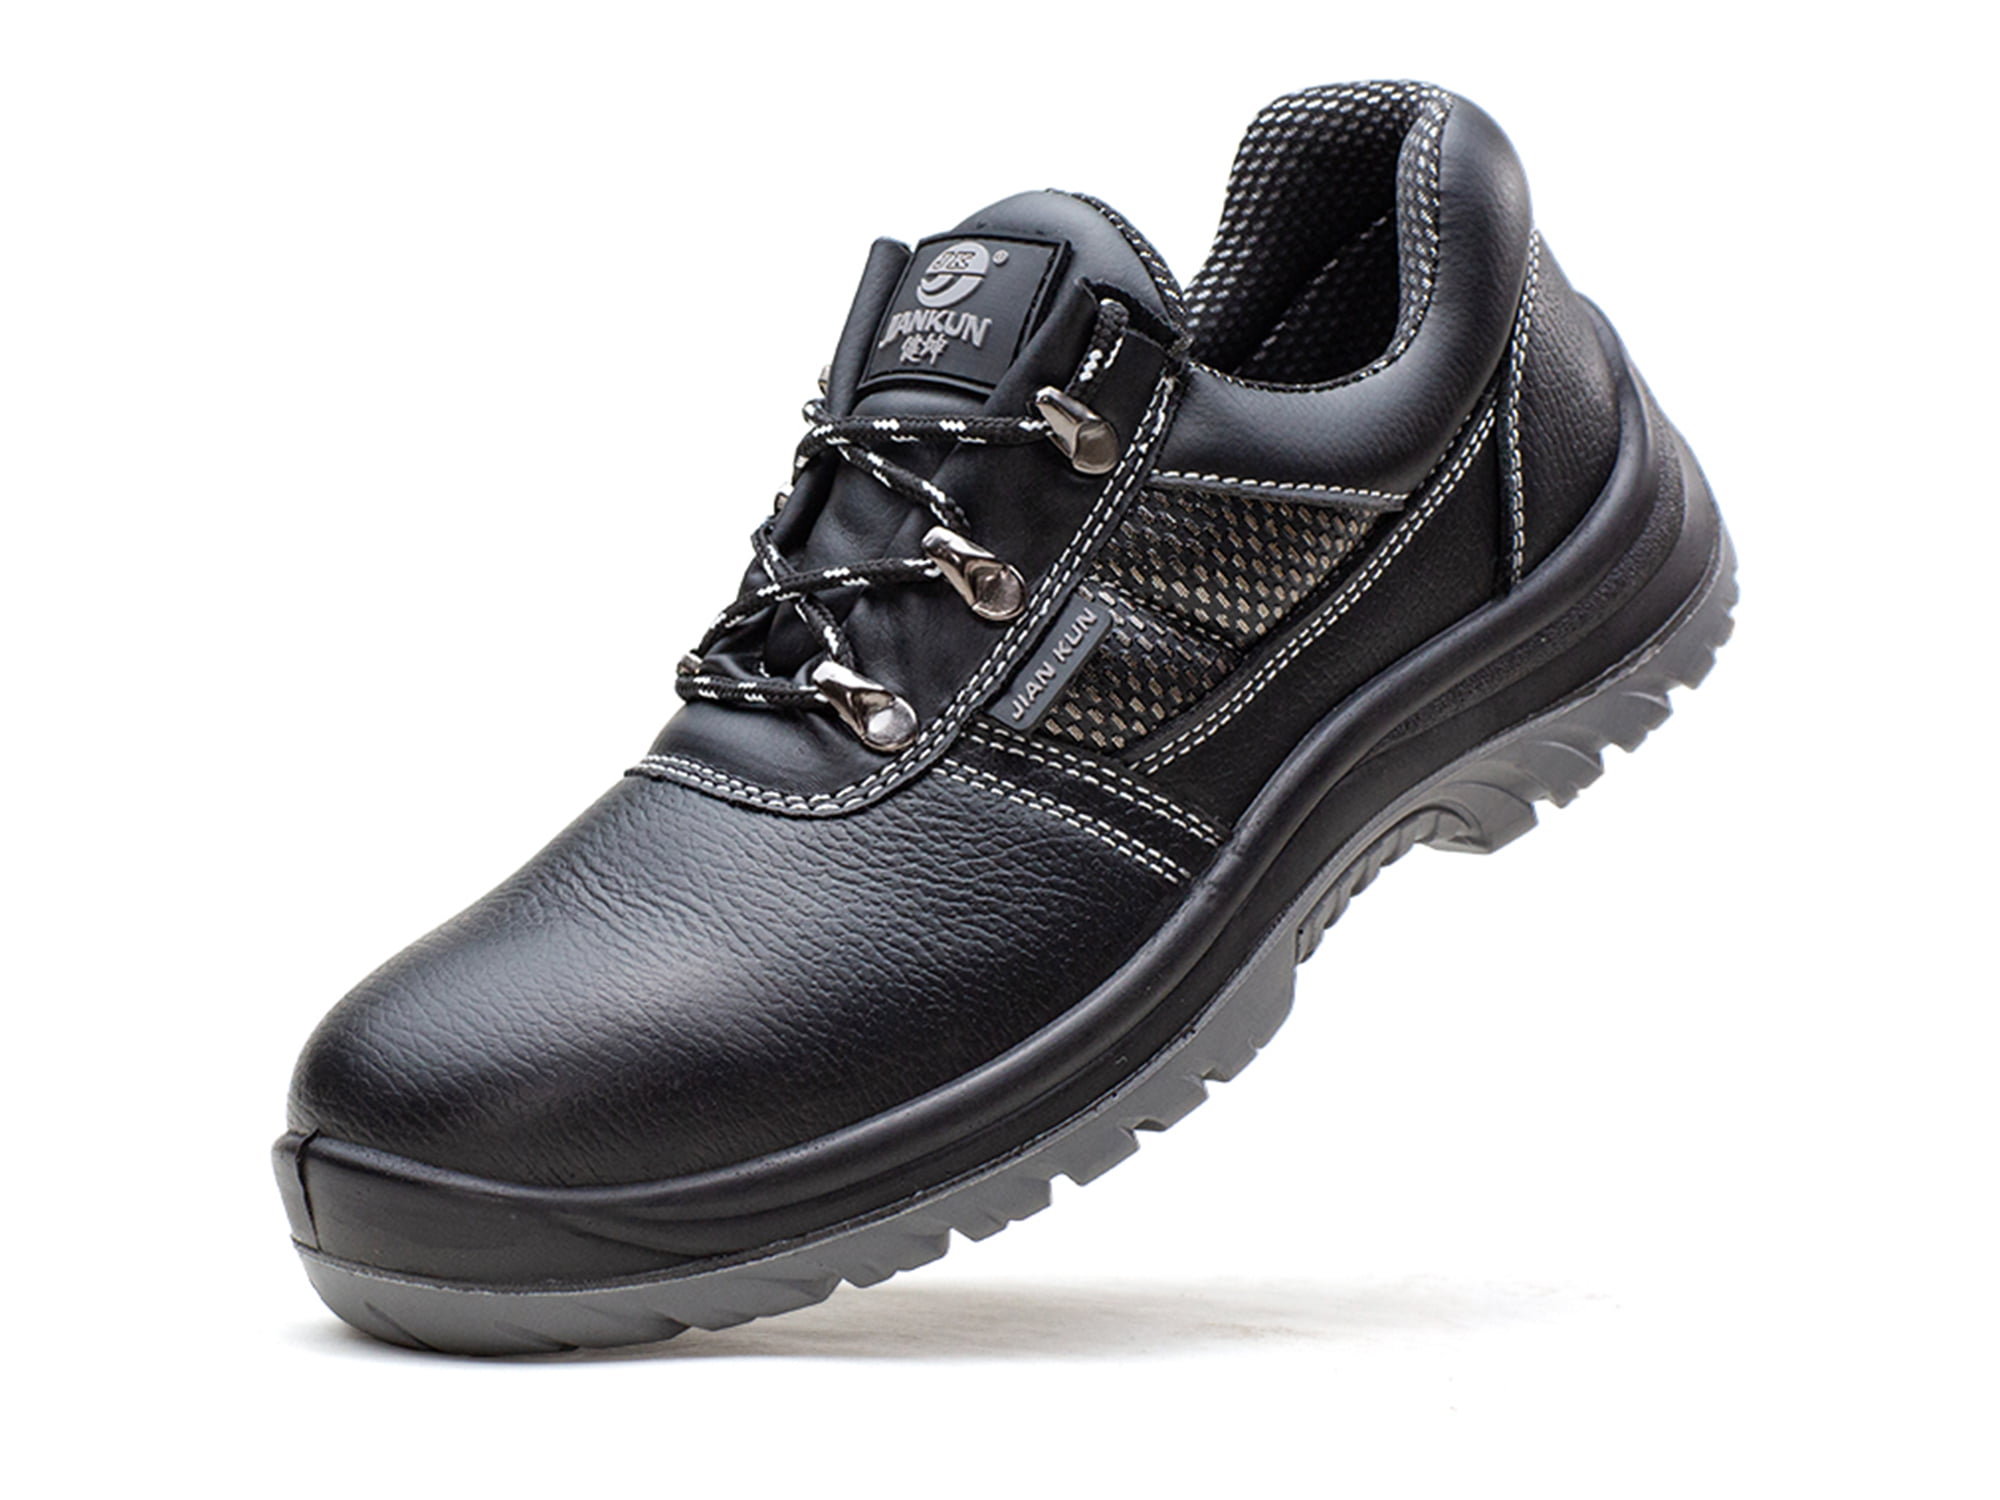 Details about   Men Women Safety Trainers Shoes Lightweight Steel Cap Work Hiking Boots Fashion 